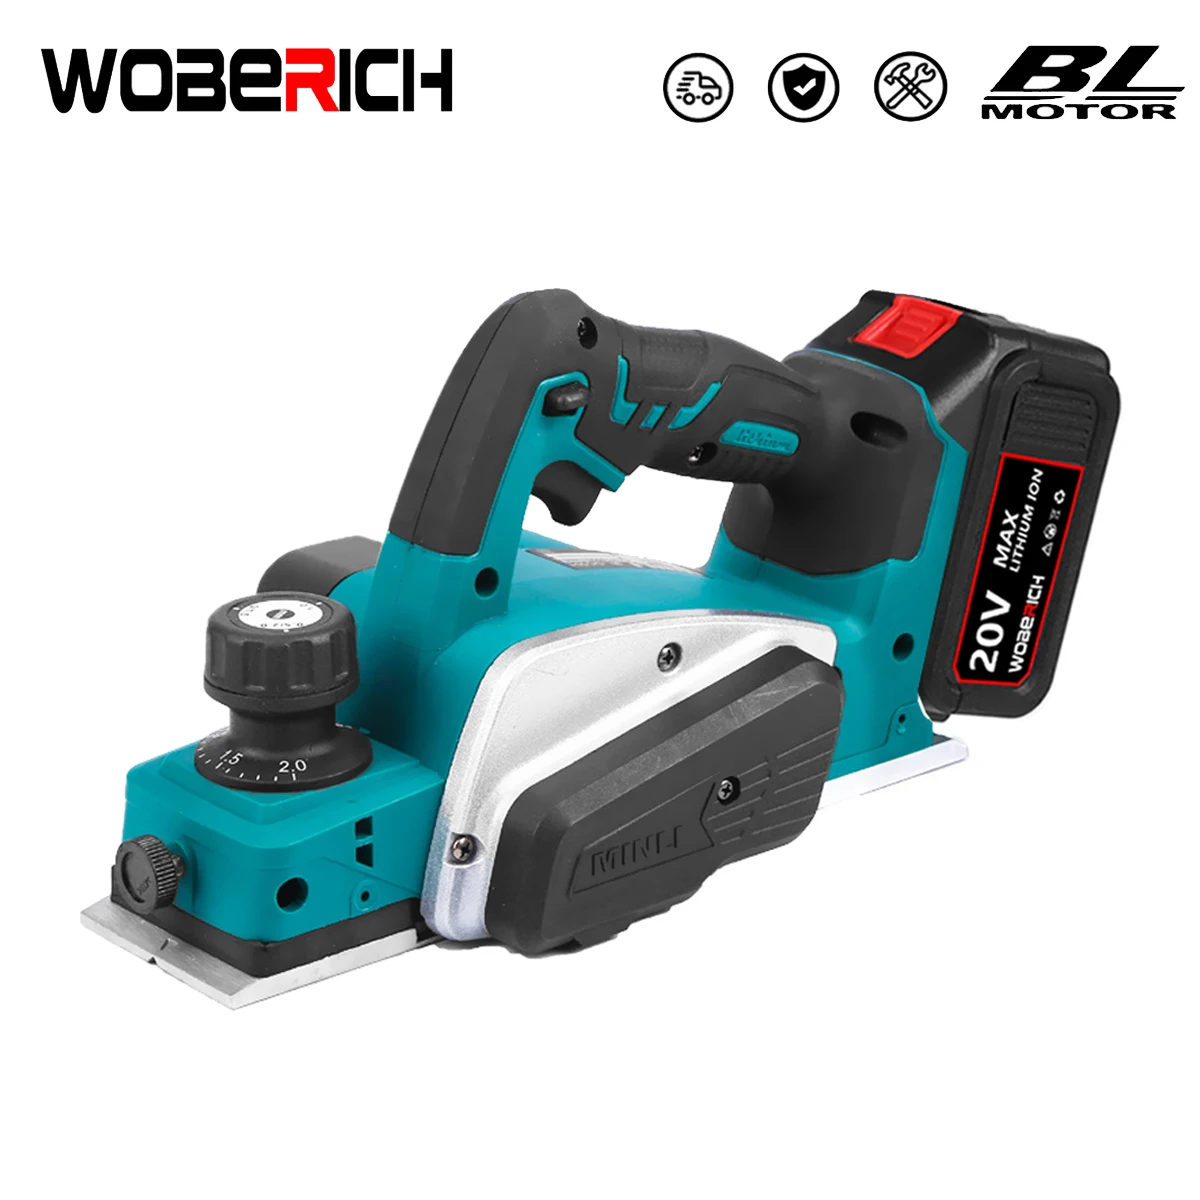 

18V Rechargeable Electric Planer Cordless Handheld Wood Cutting Tool with Wrench 15000RPM for Makita 18V Battery By WOBERICH